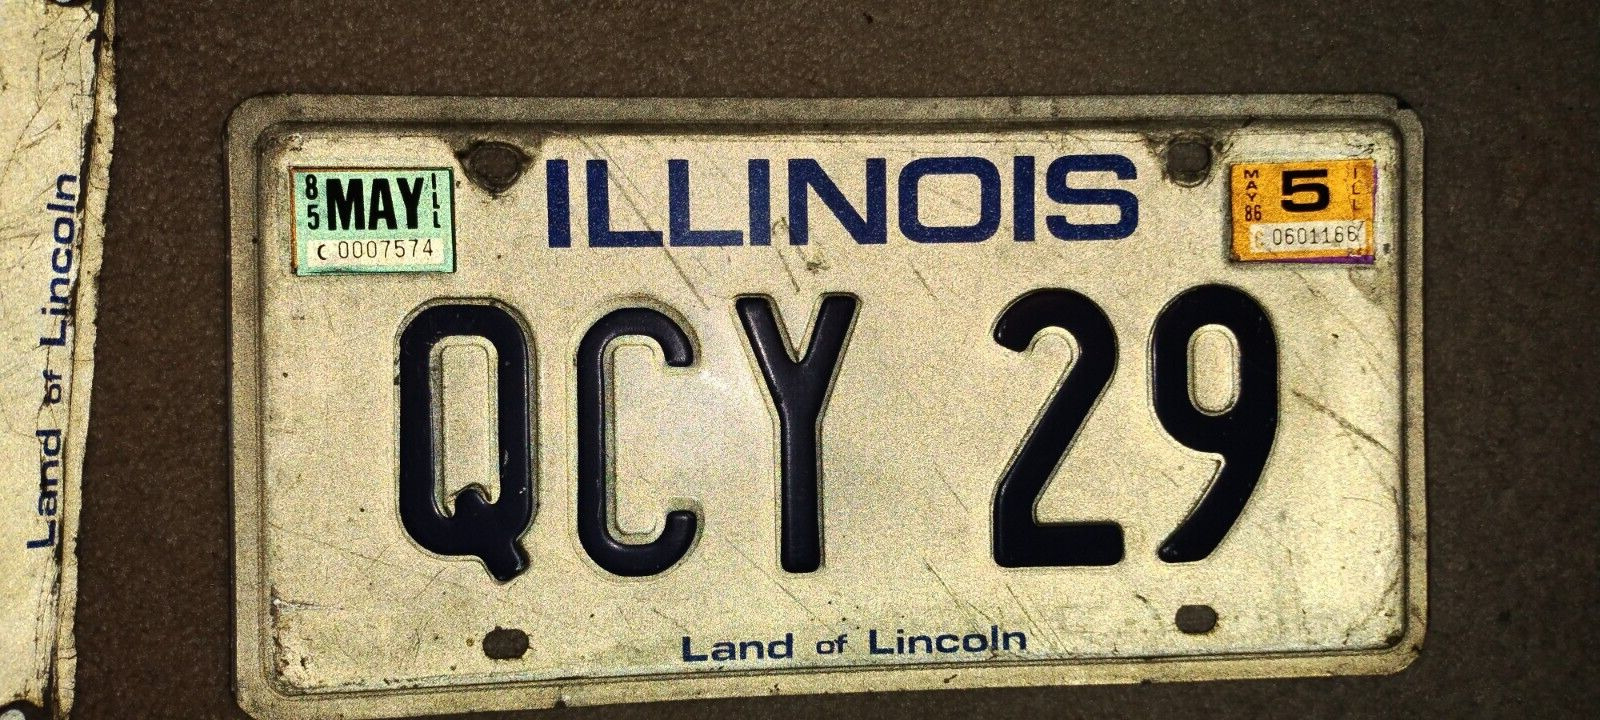 1985 illinois license plate with Tags \